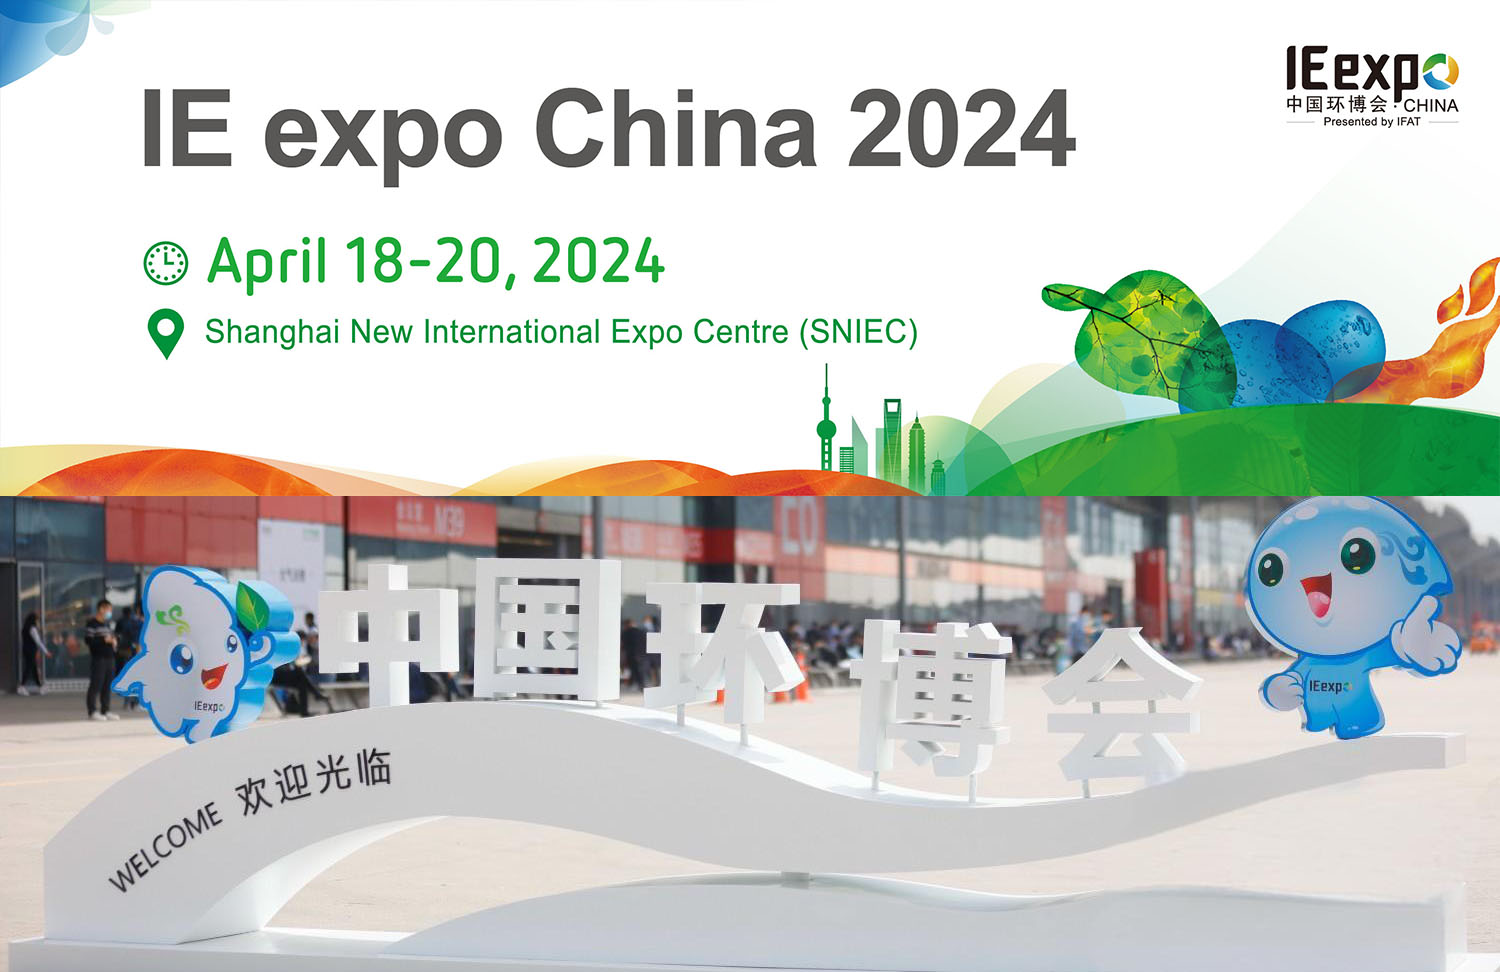 IE expo China 2024 in SNIEC